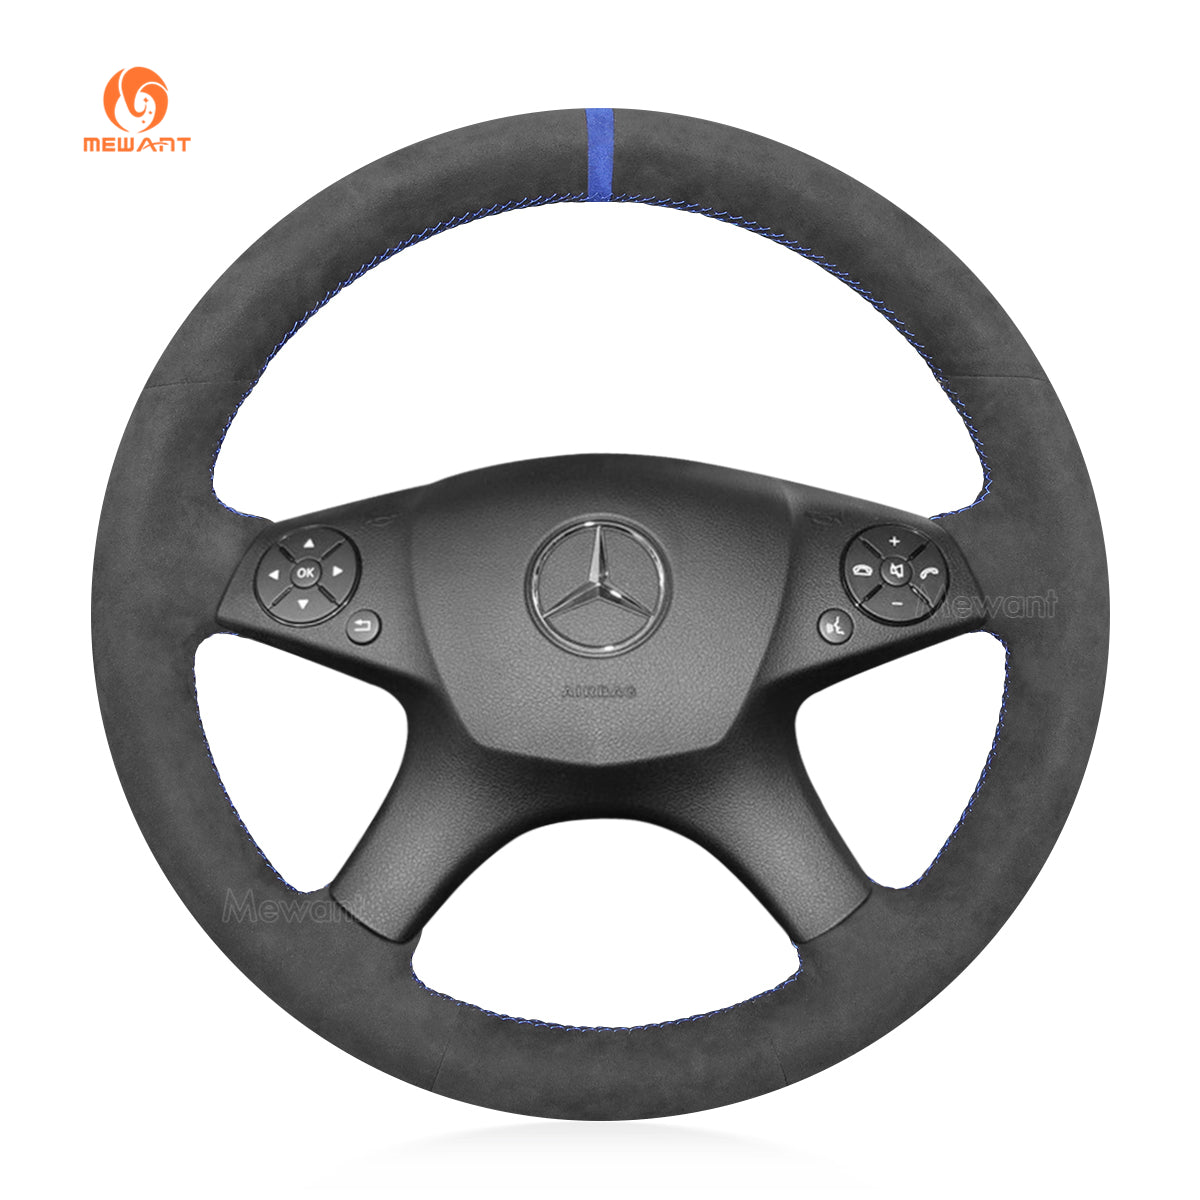 Car Steering Wheel Cover for Mercedes Benz C-Class W204 2007-2011